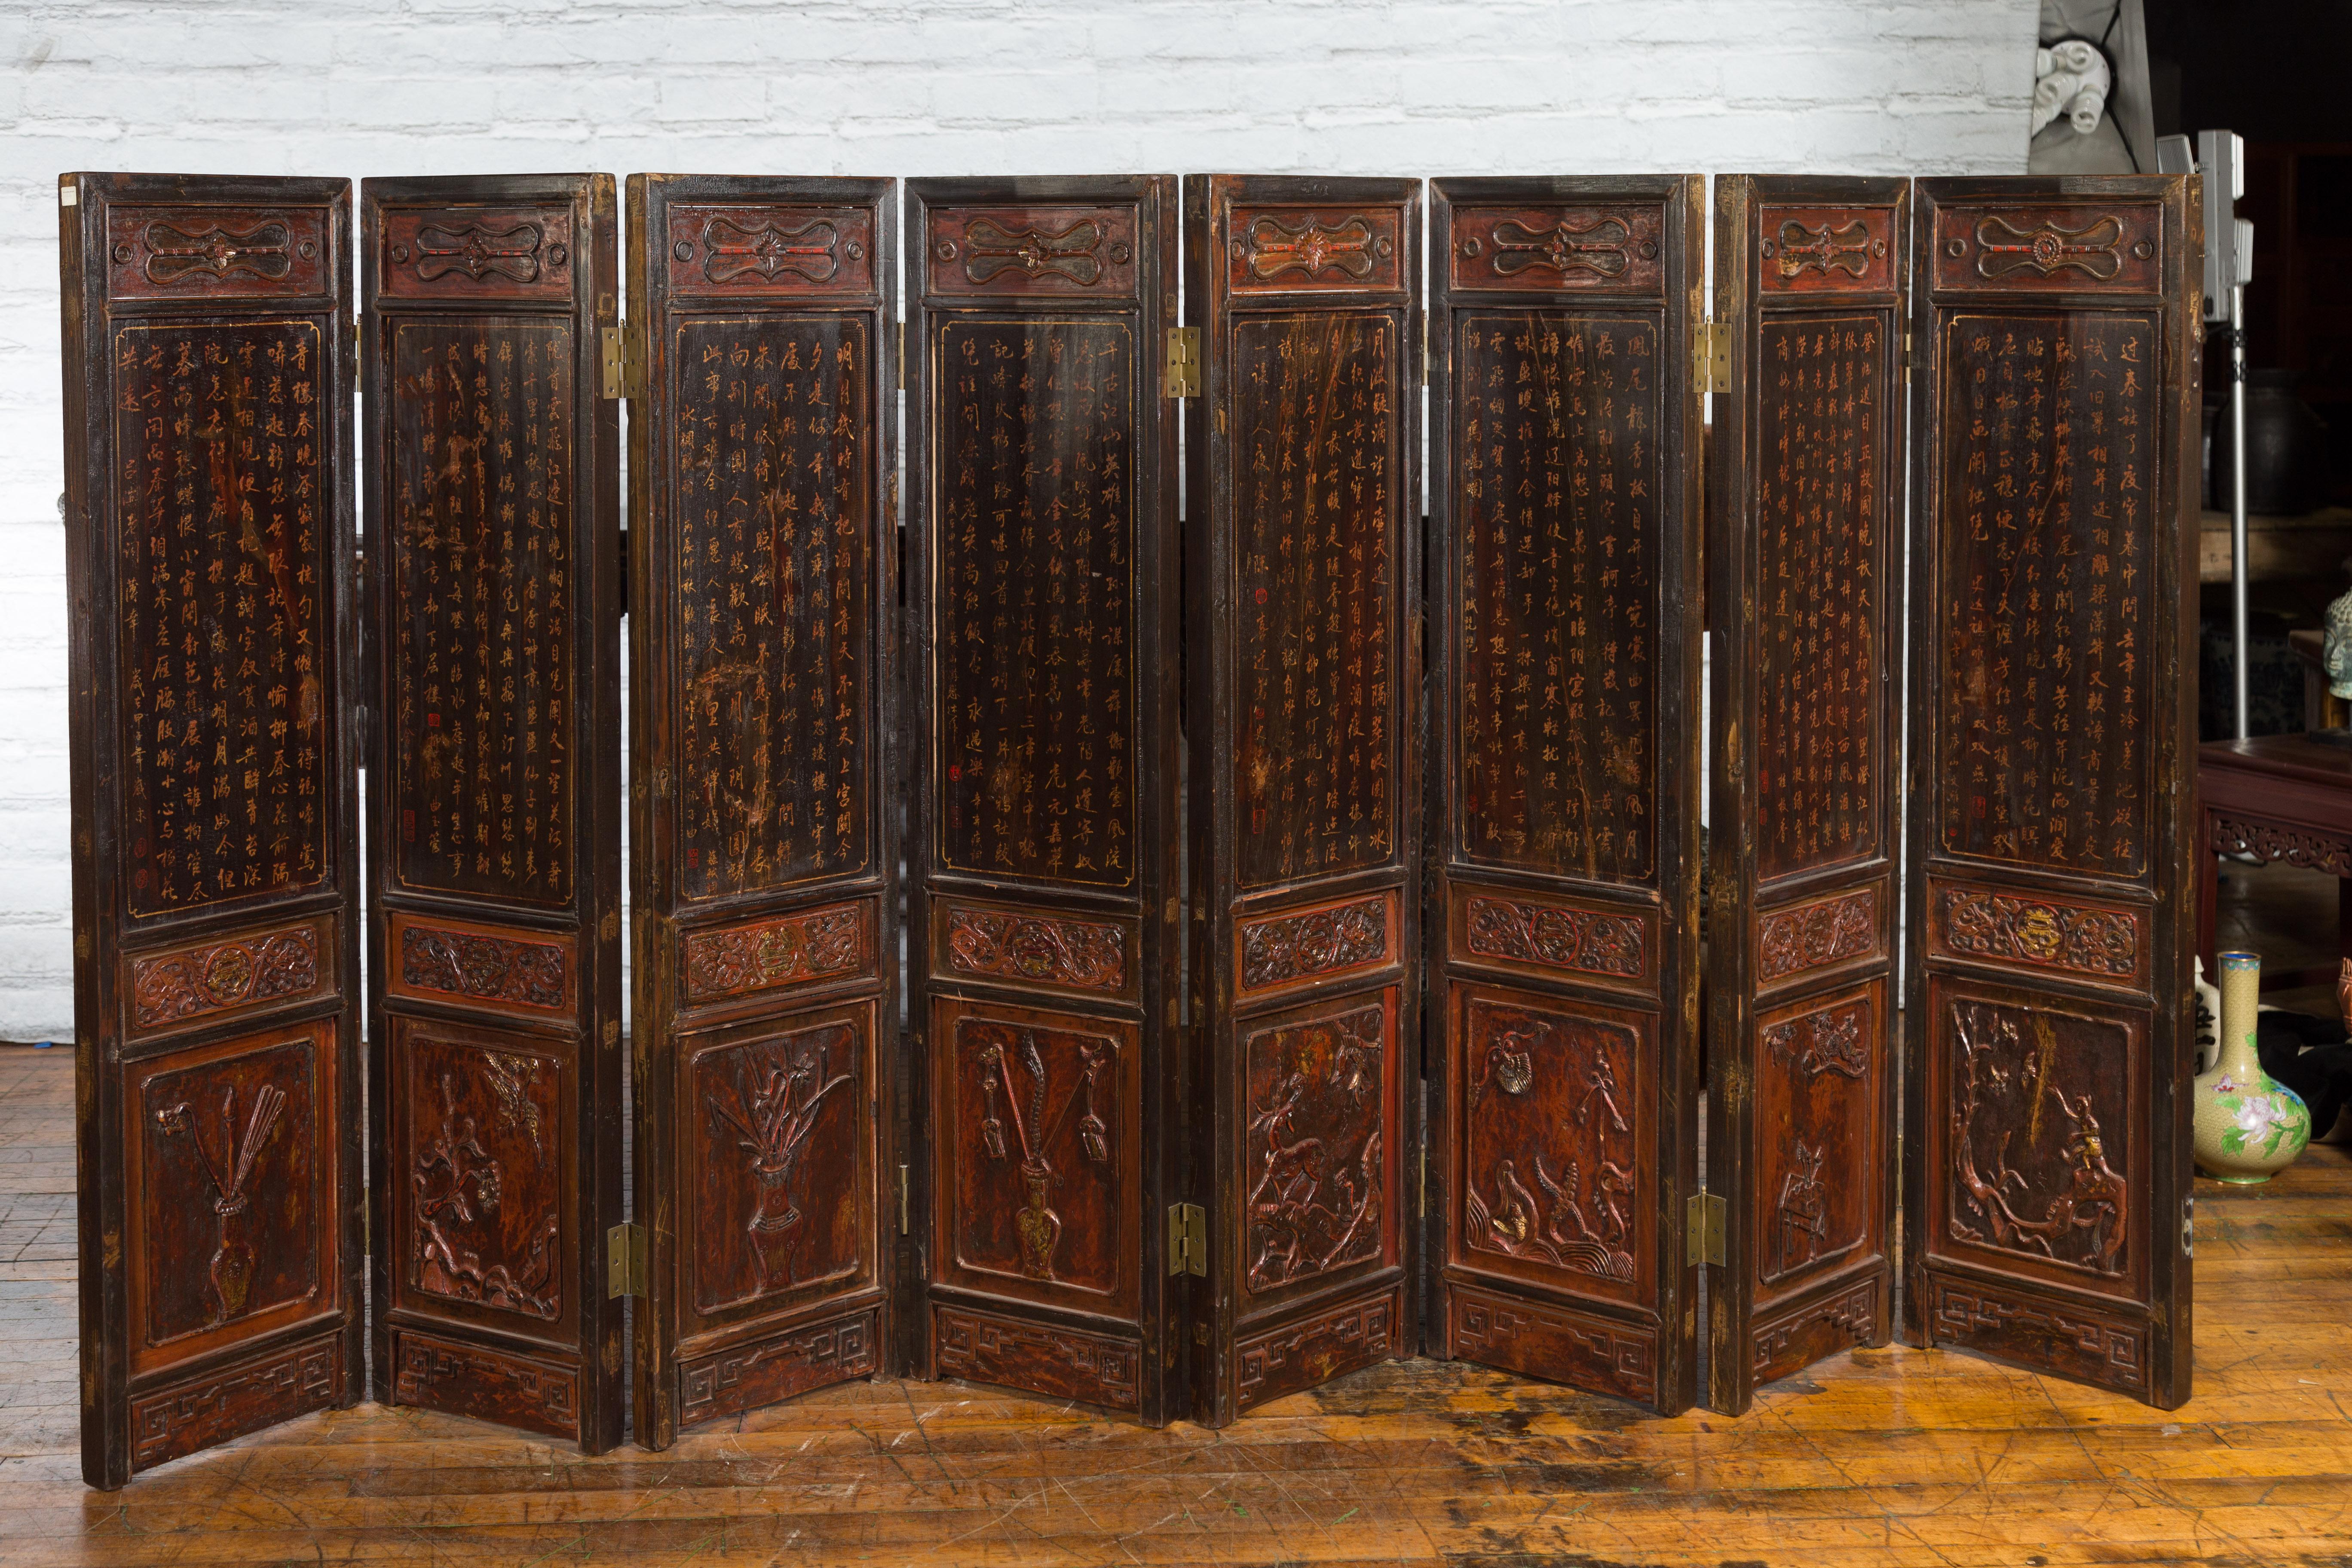 A Chinese two part eight-panel wooden screen from the early 20th century, with low-relief carvings, gilt motifs and calligraphy. Created in China during the early years of the 20th century, this screen features a brown lacquered ground accented with